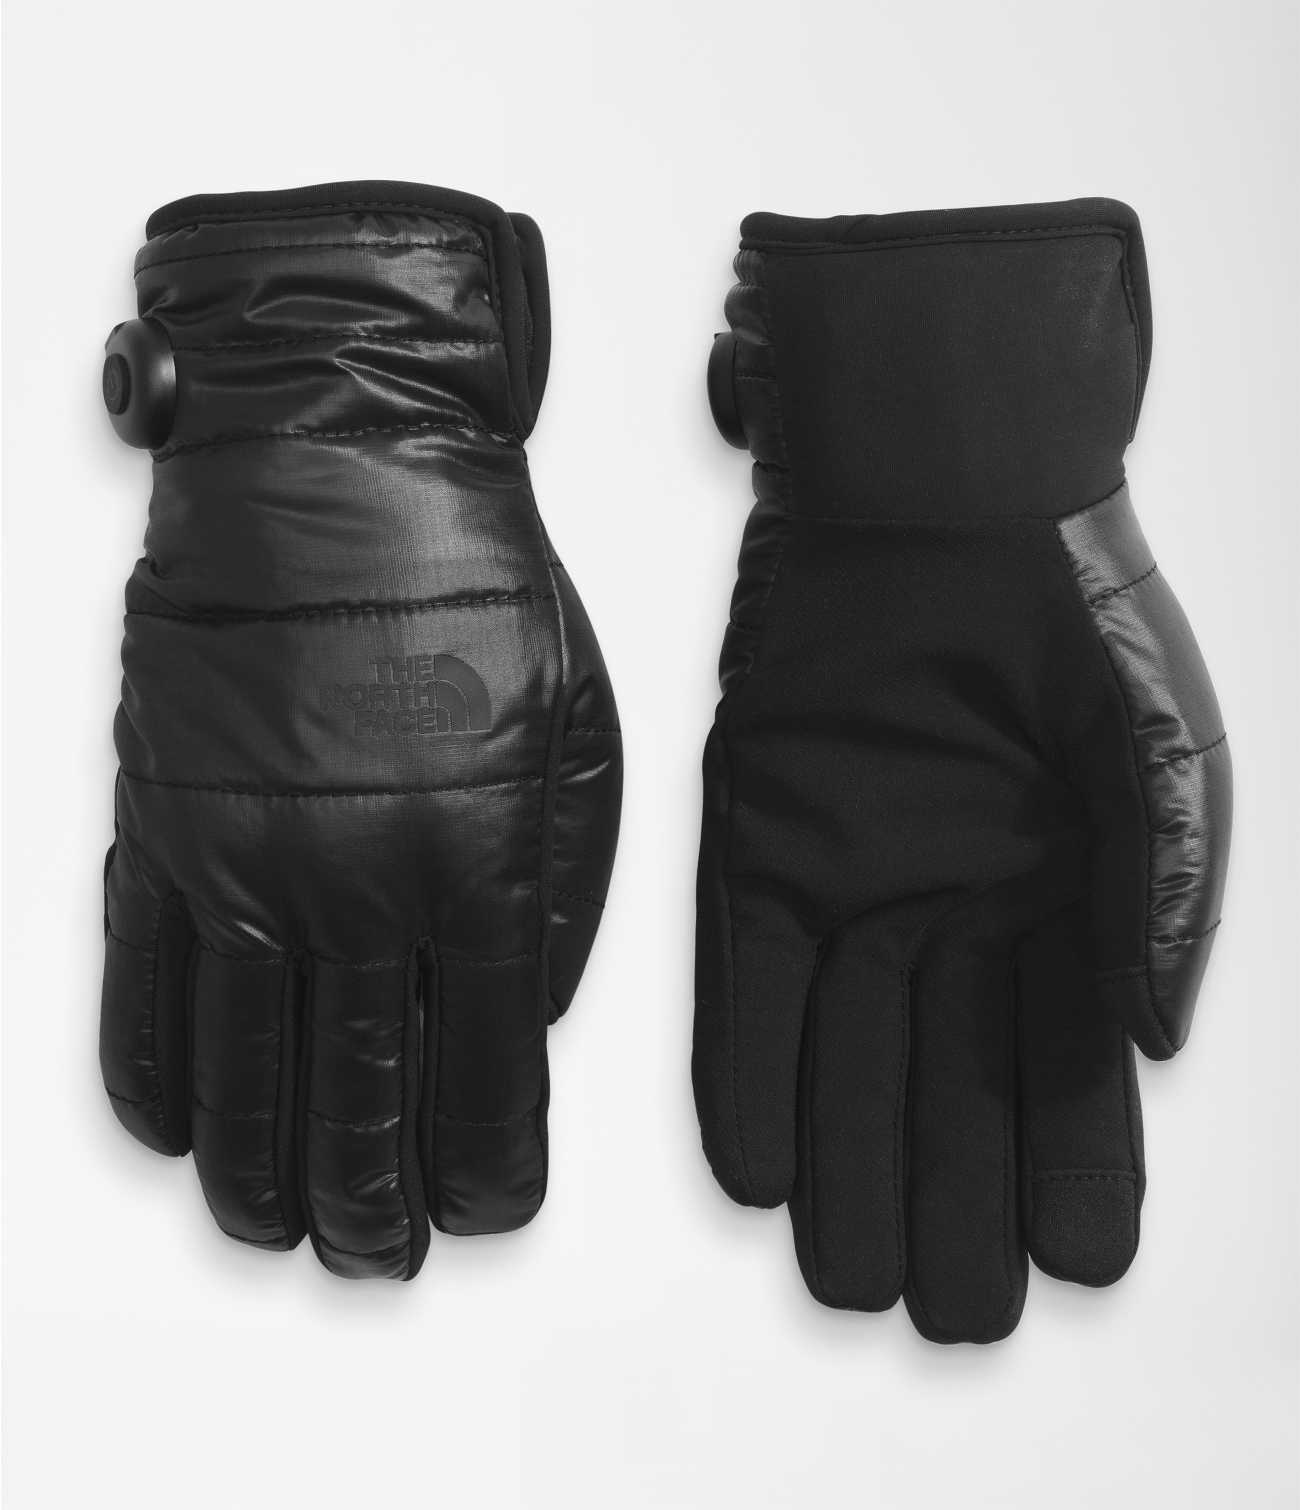 QUILTED HEATED GLOVE | The North Face | The North Face Renewed